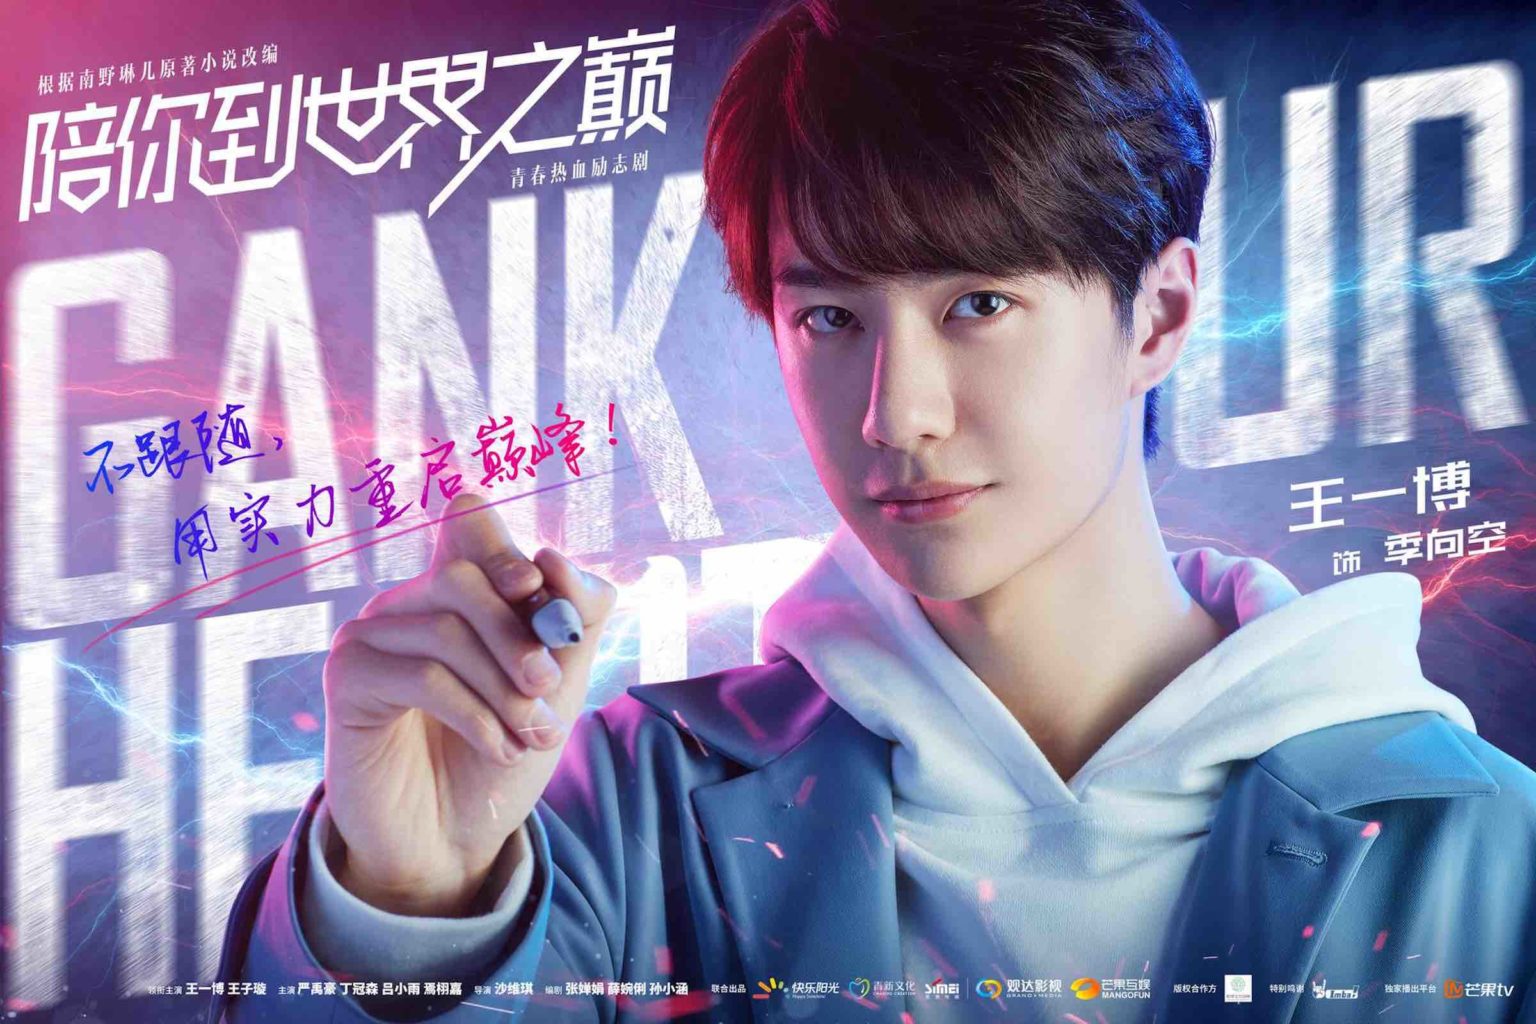 What will make you want to watch all of 'Gank Your Heart' in one sitting? Fall in love with Wang Yibo as Ji Xiang Kong as we share the reasons why we stan!